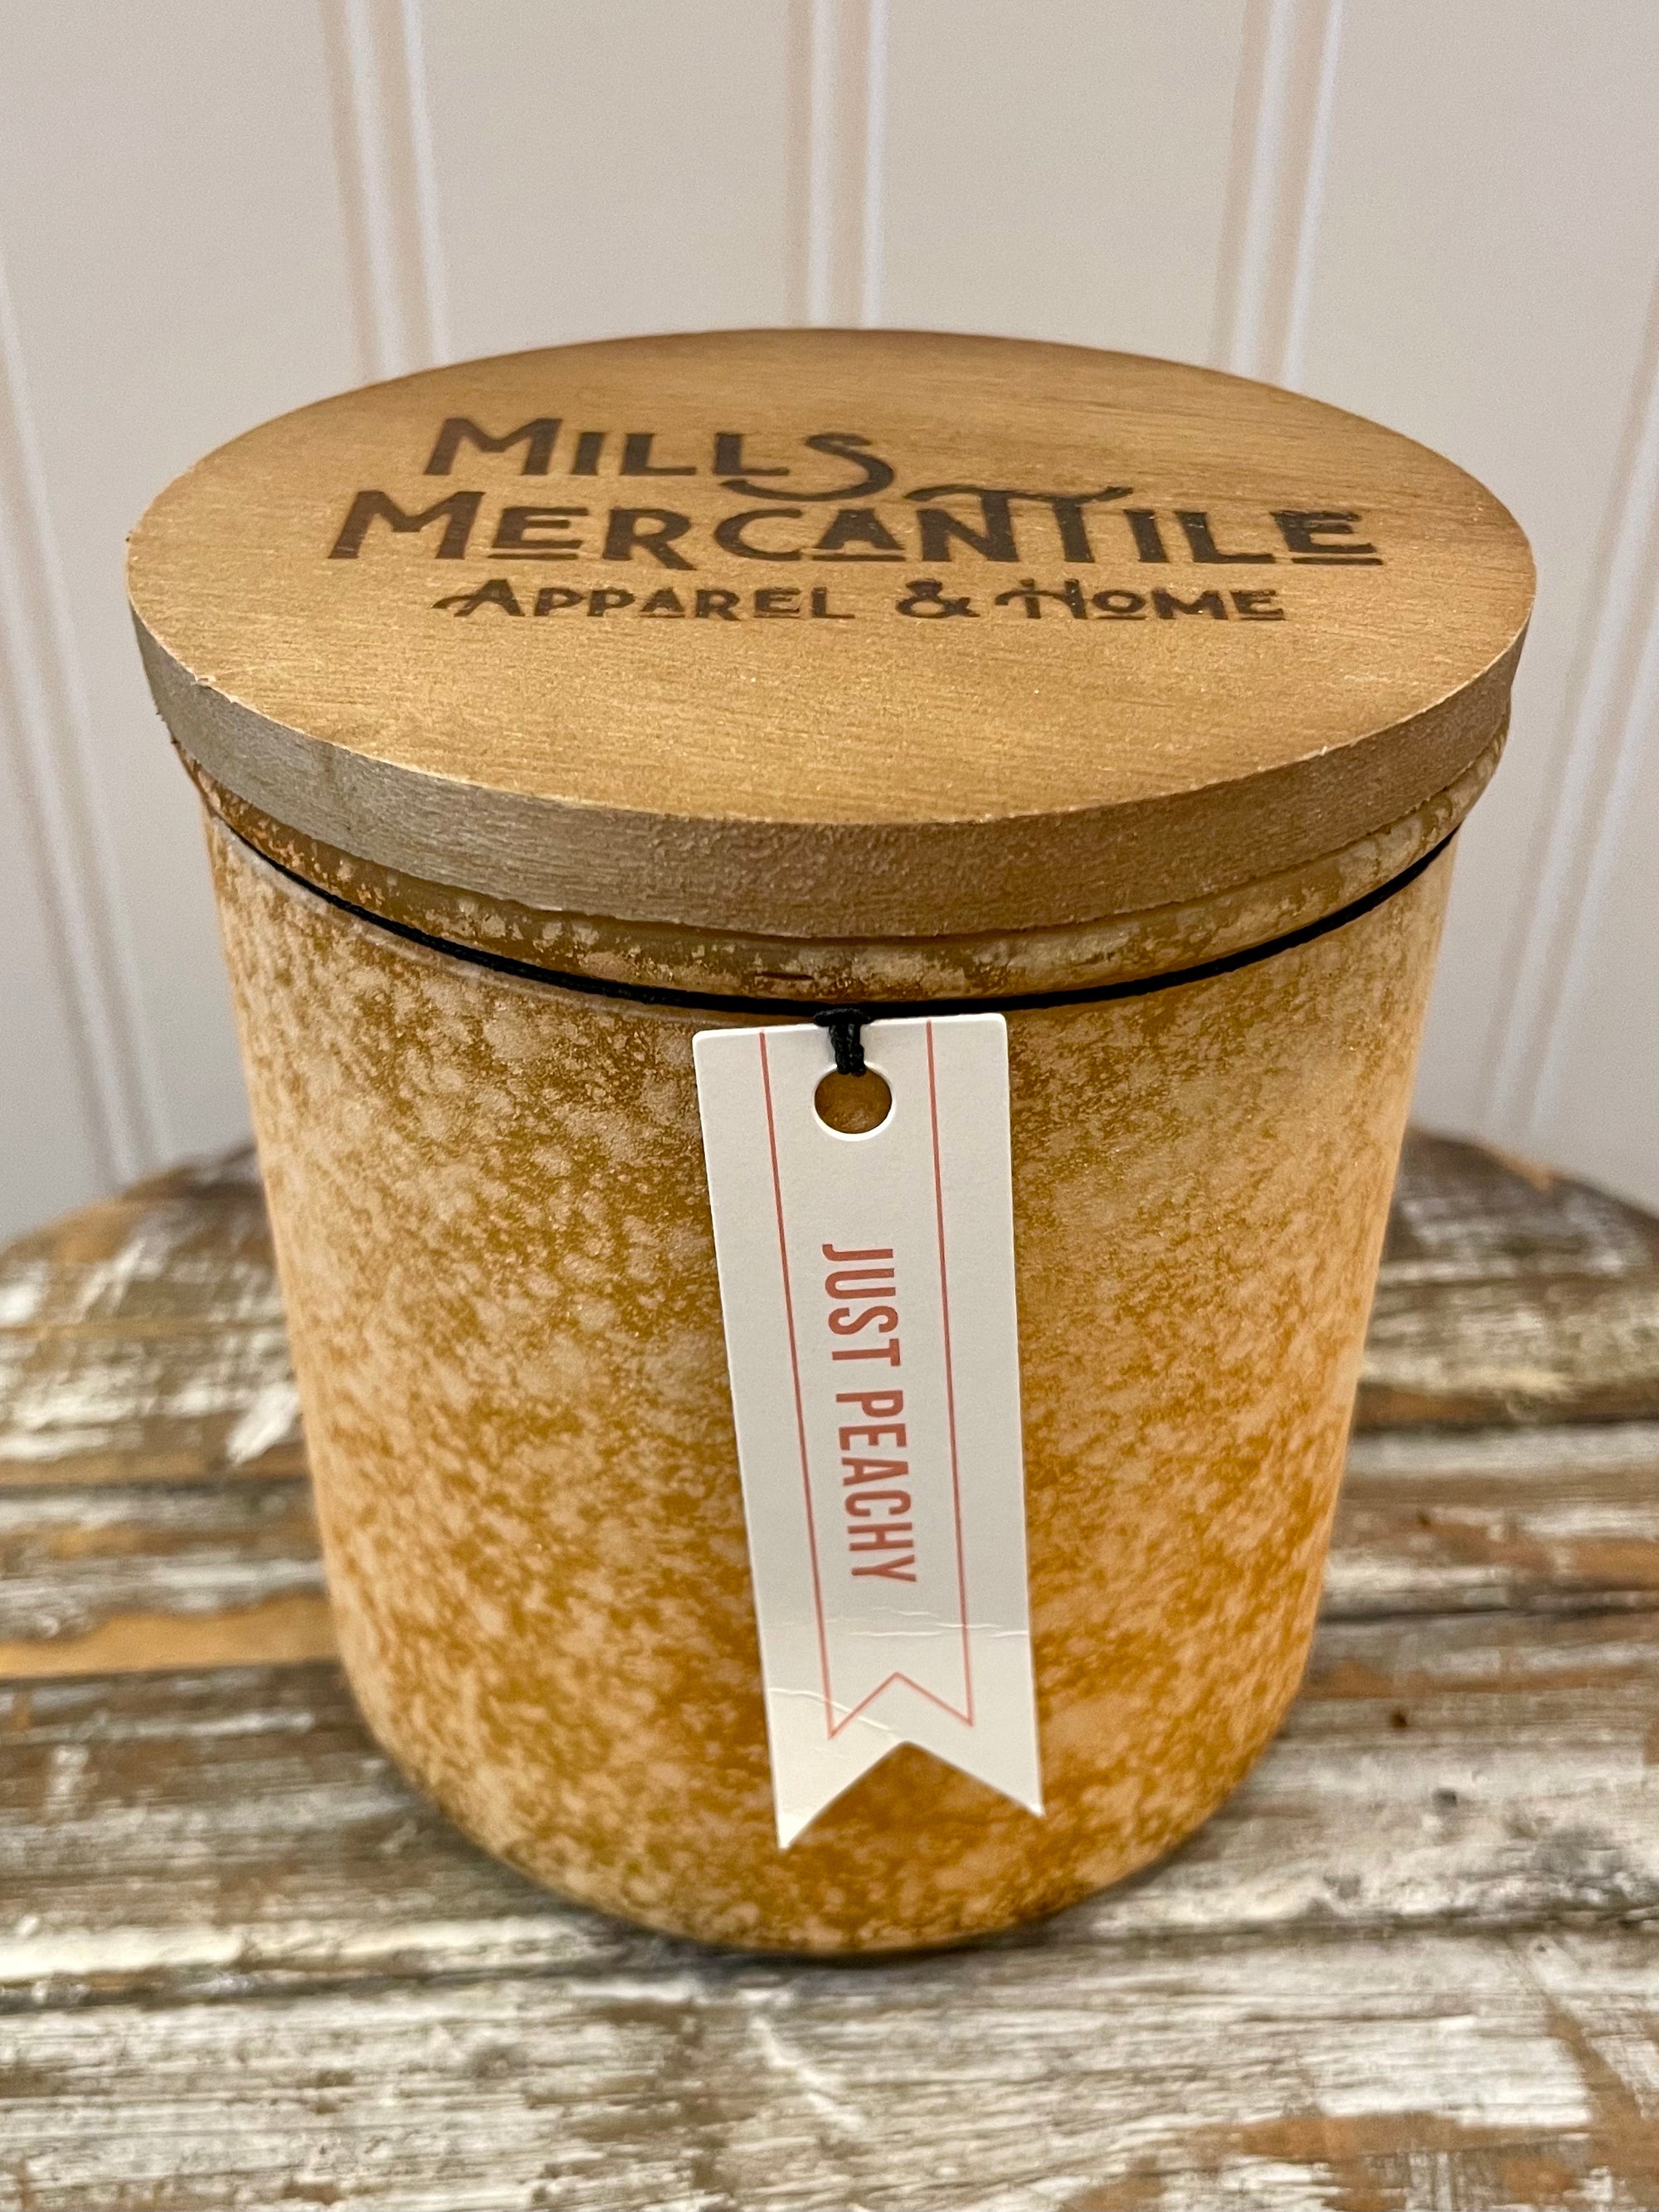 Just Peachy Scent - Mills Mercantile Candle